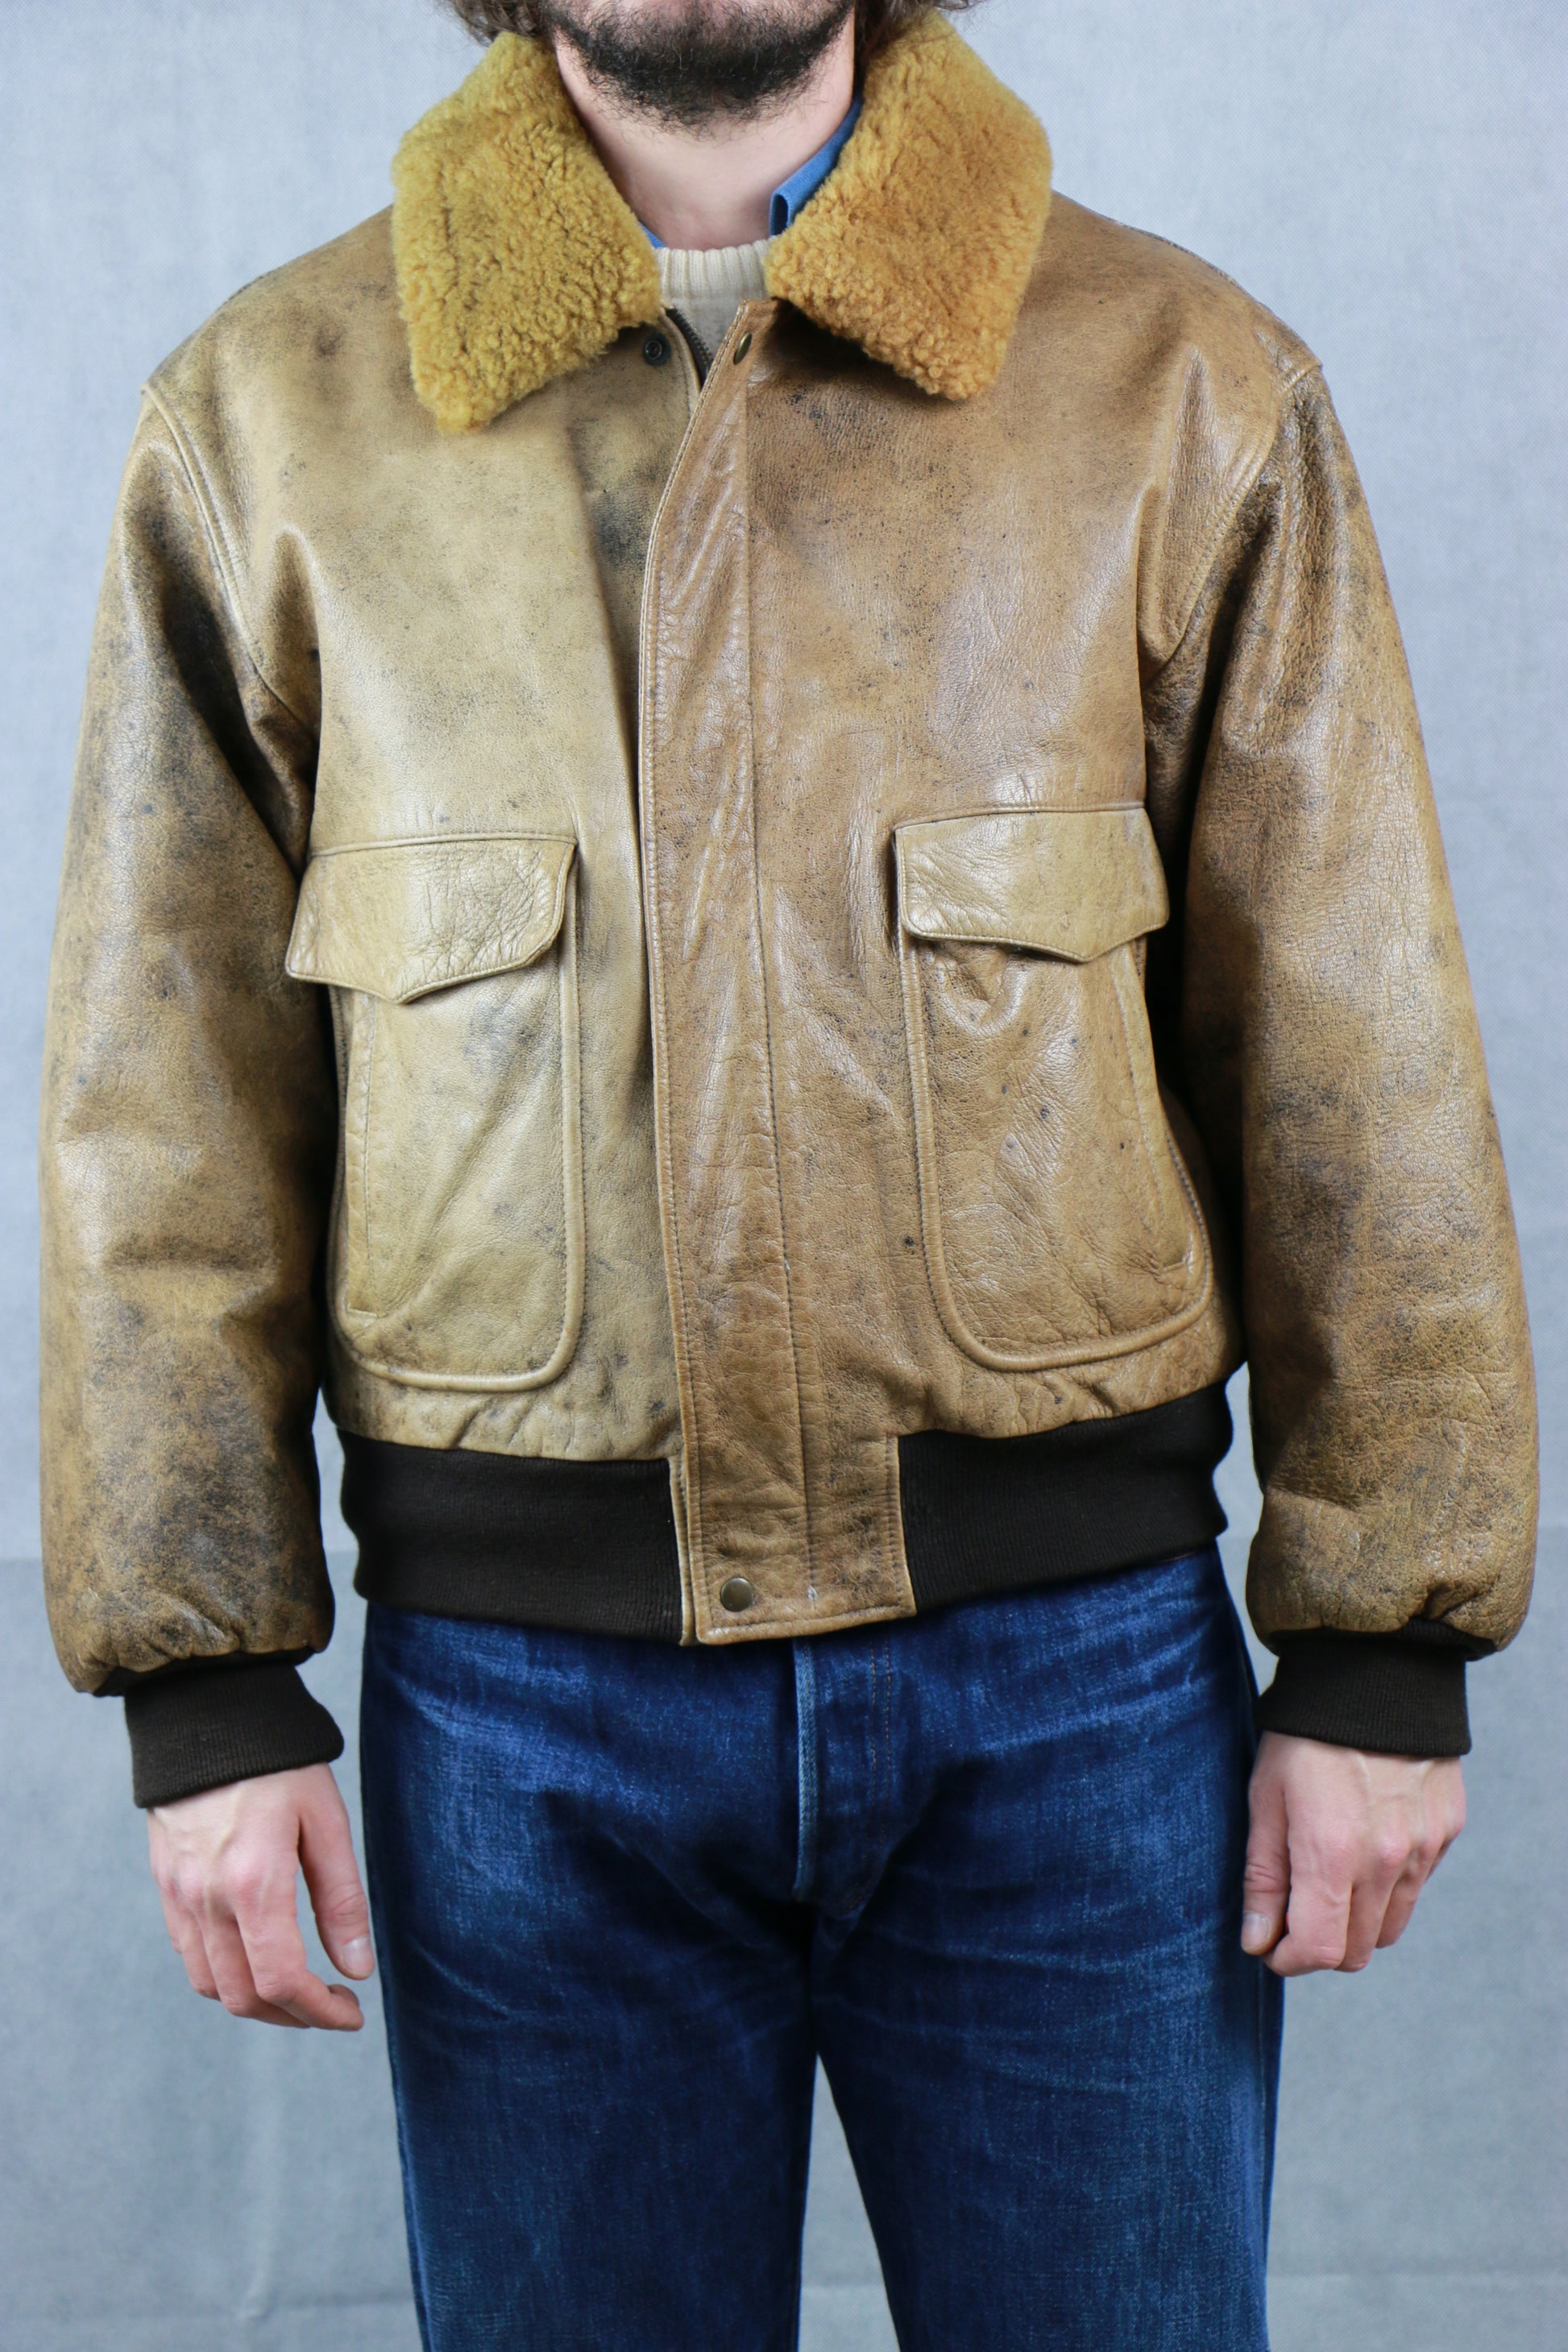 A-2 Leather Jacket with shearling collar - vintage clothing clochard92.com